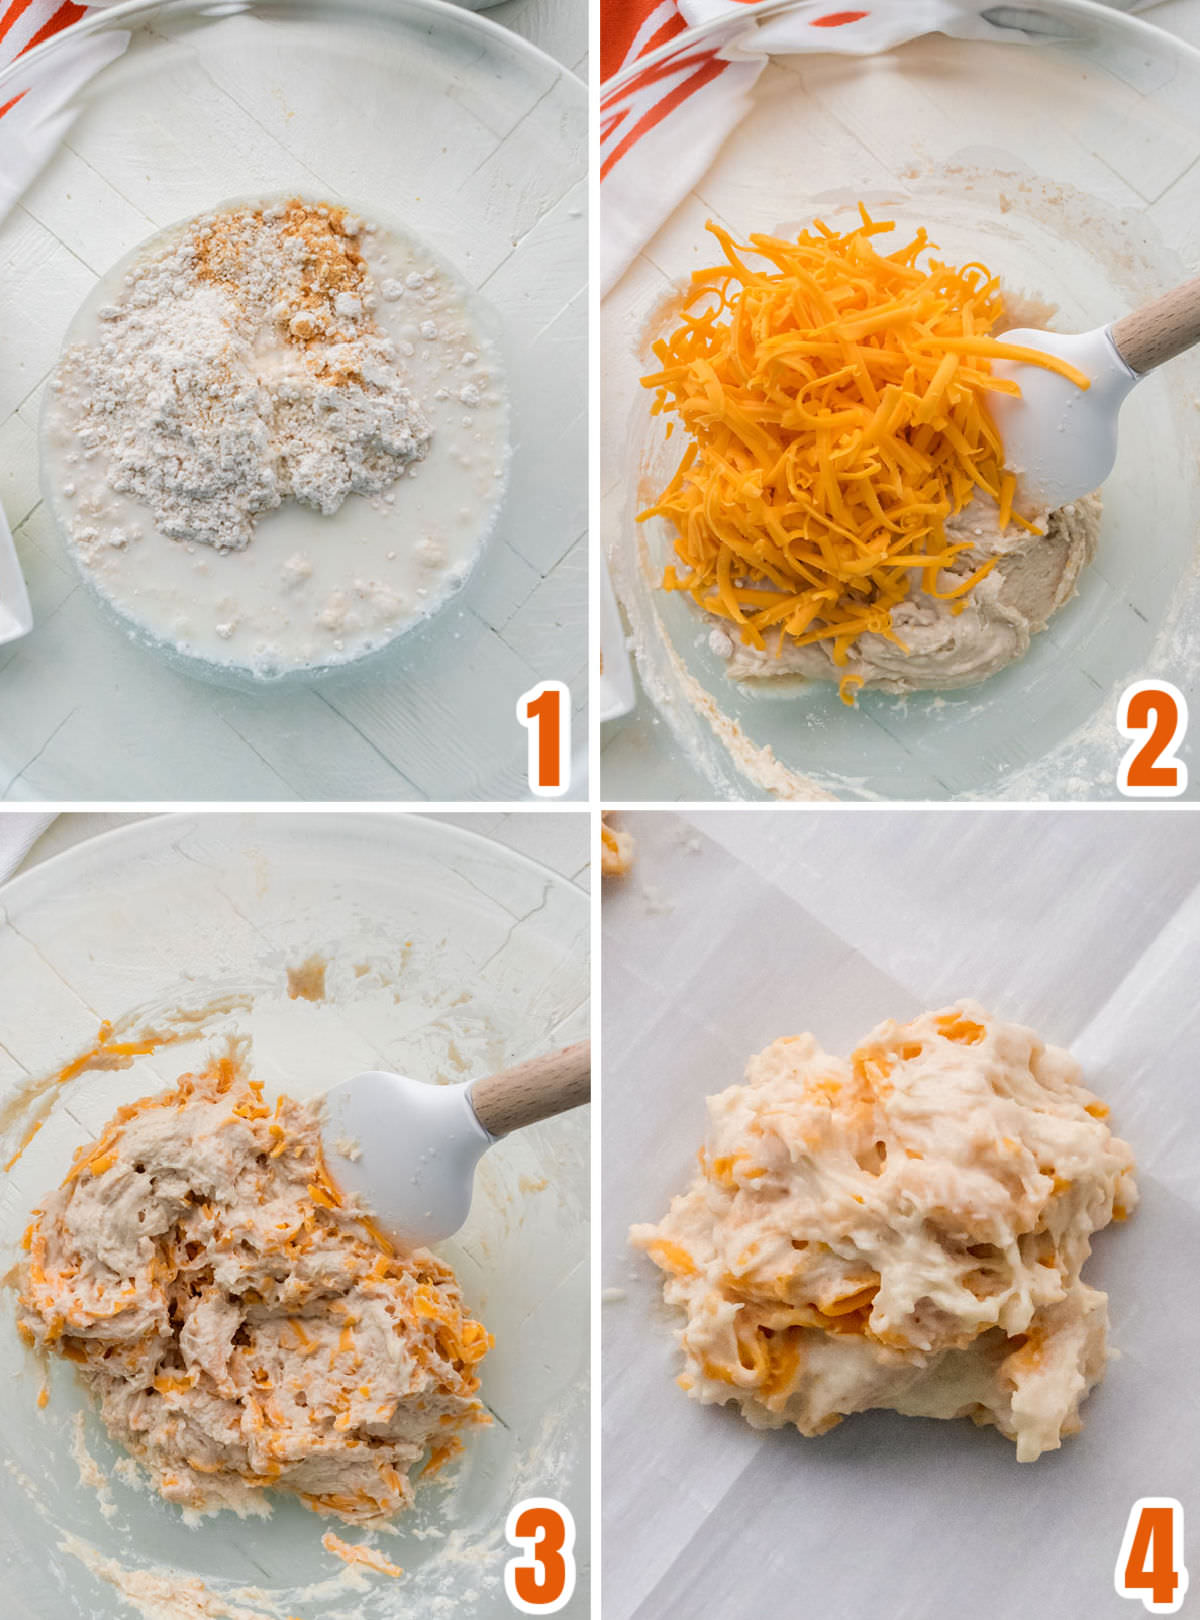 Collage image showing how to make the biscuit dough for the Cheesy Garlic Biscuits.